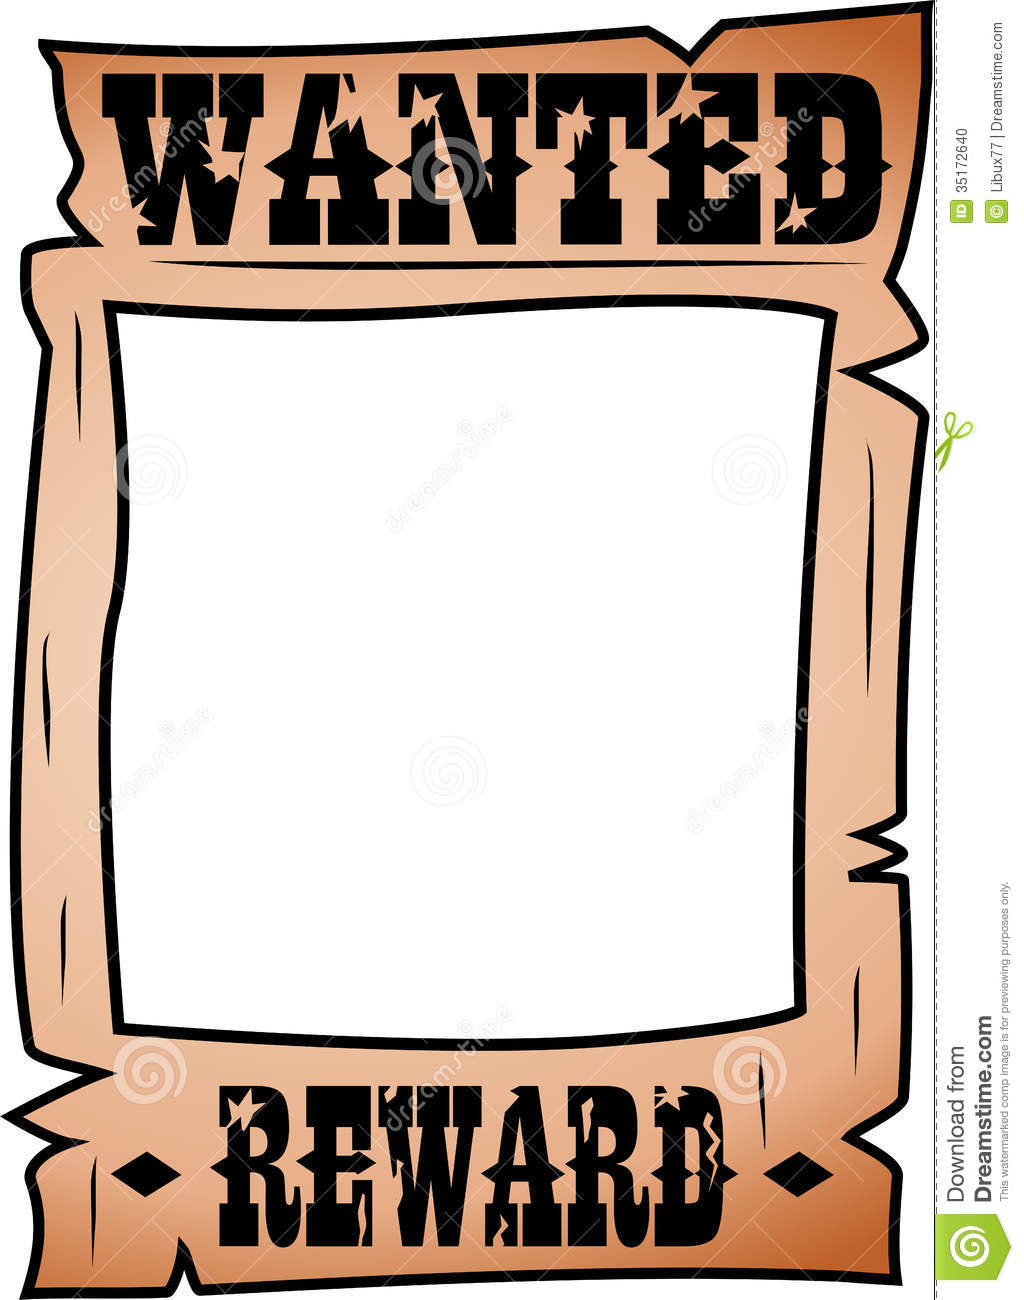 19+ Wanted Poster Clipart.